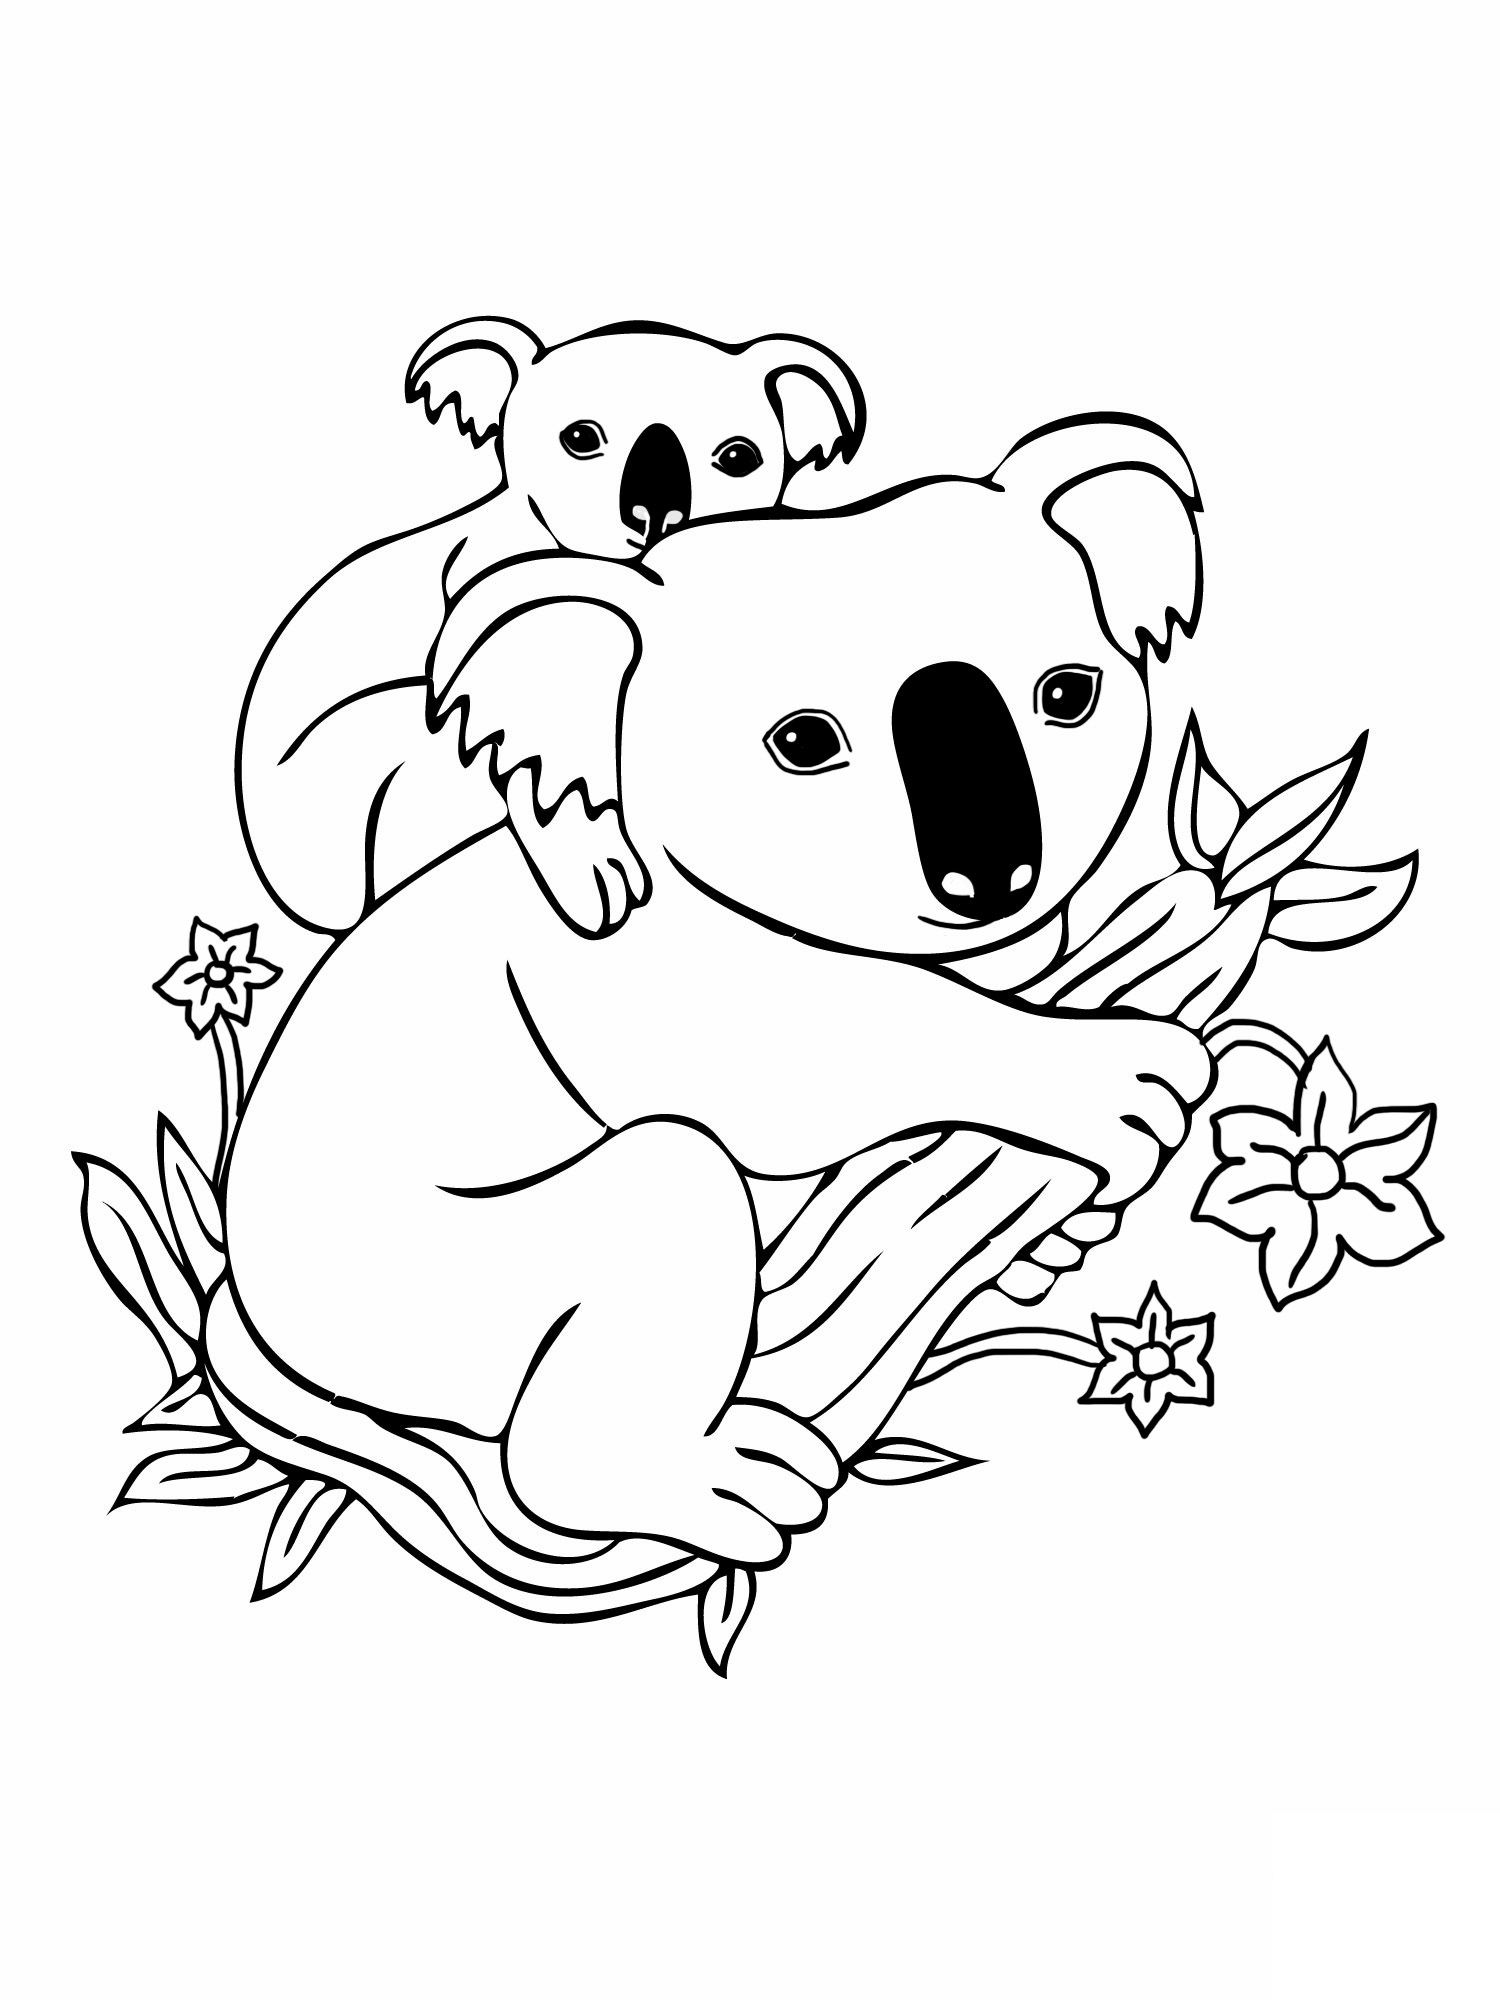 Free printable koala coloring pages for kids bear coloring pages cute coloring pages cartoon coloring pages